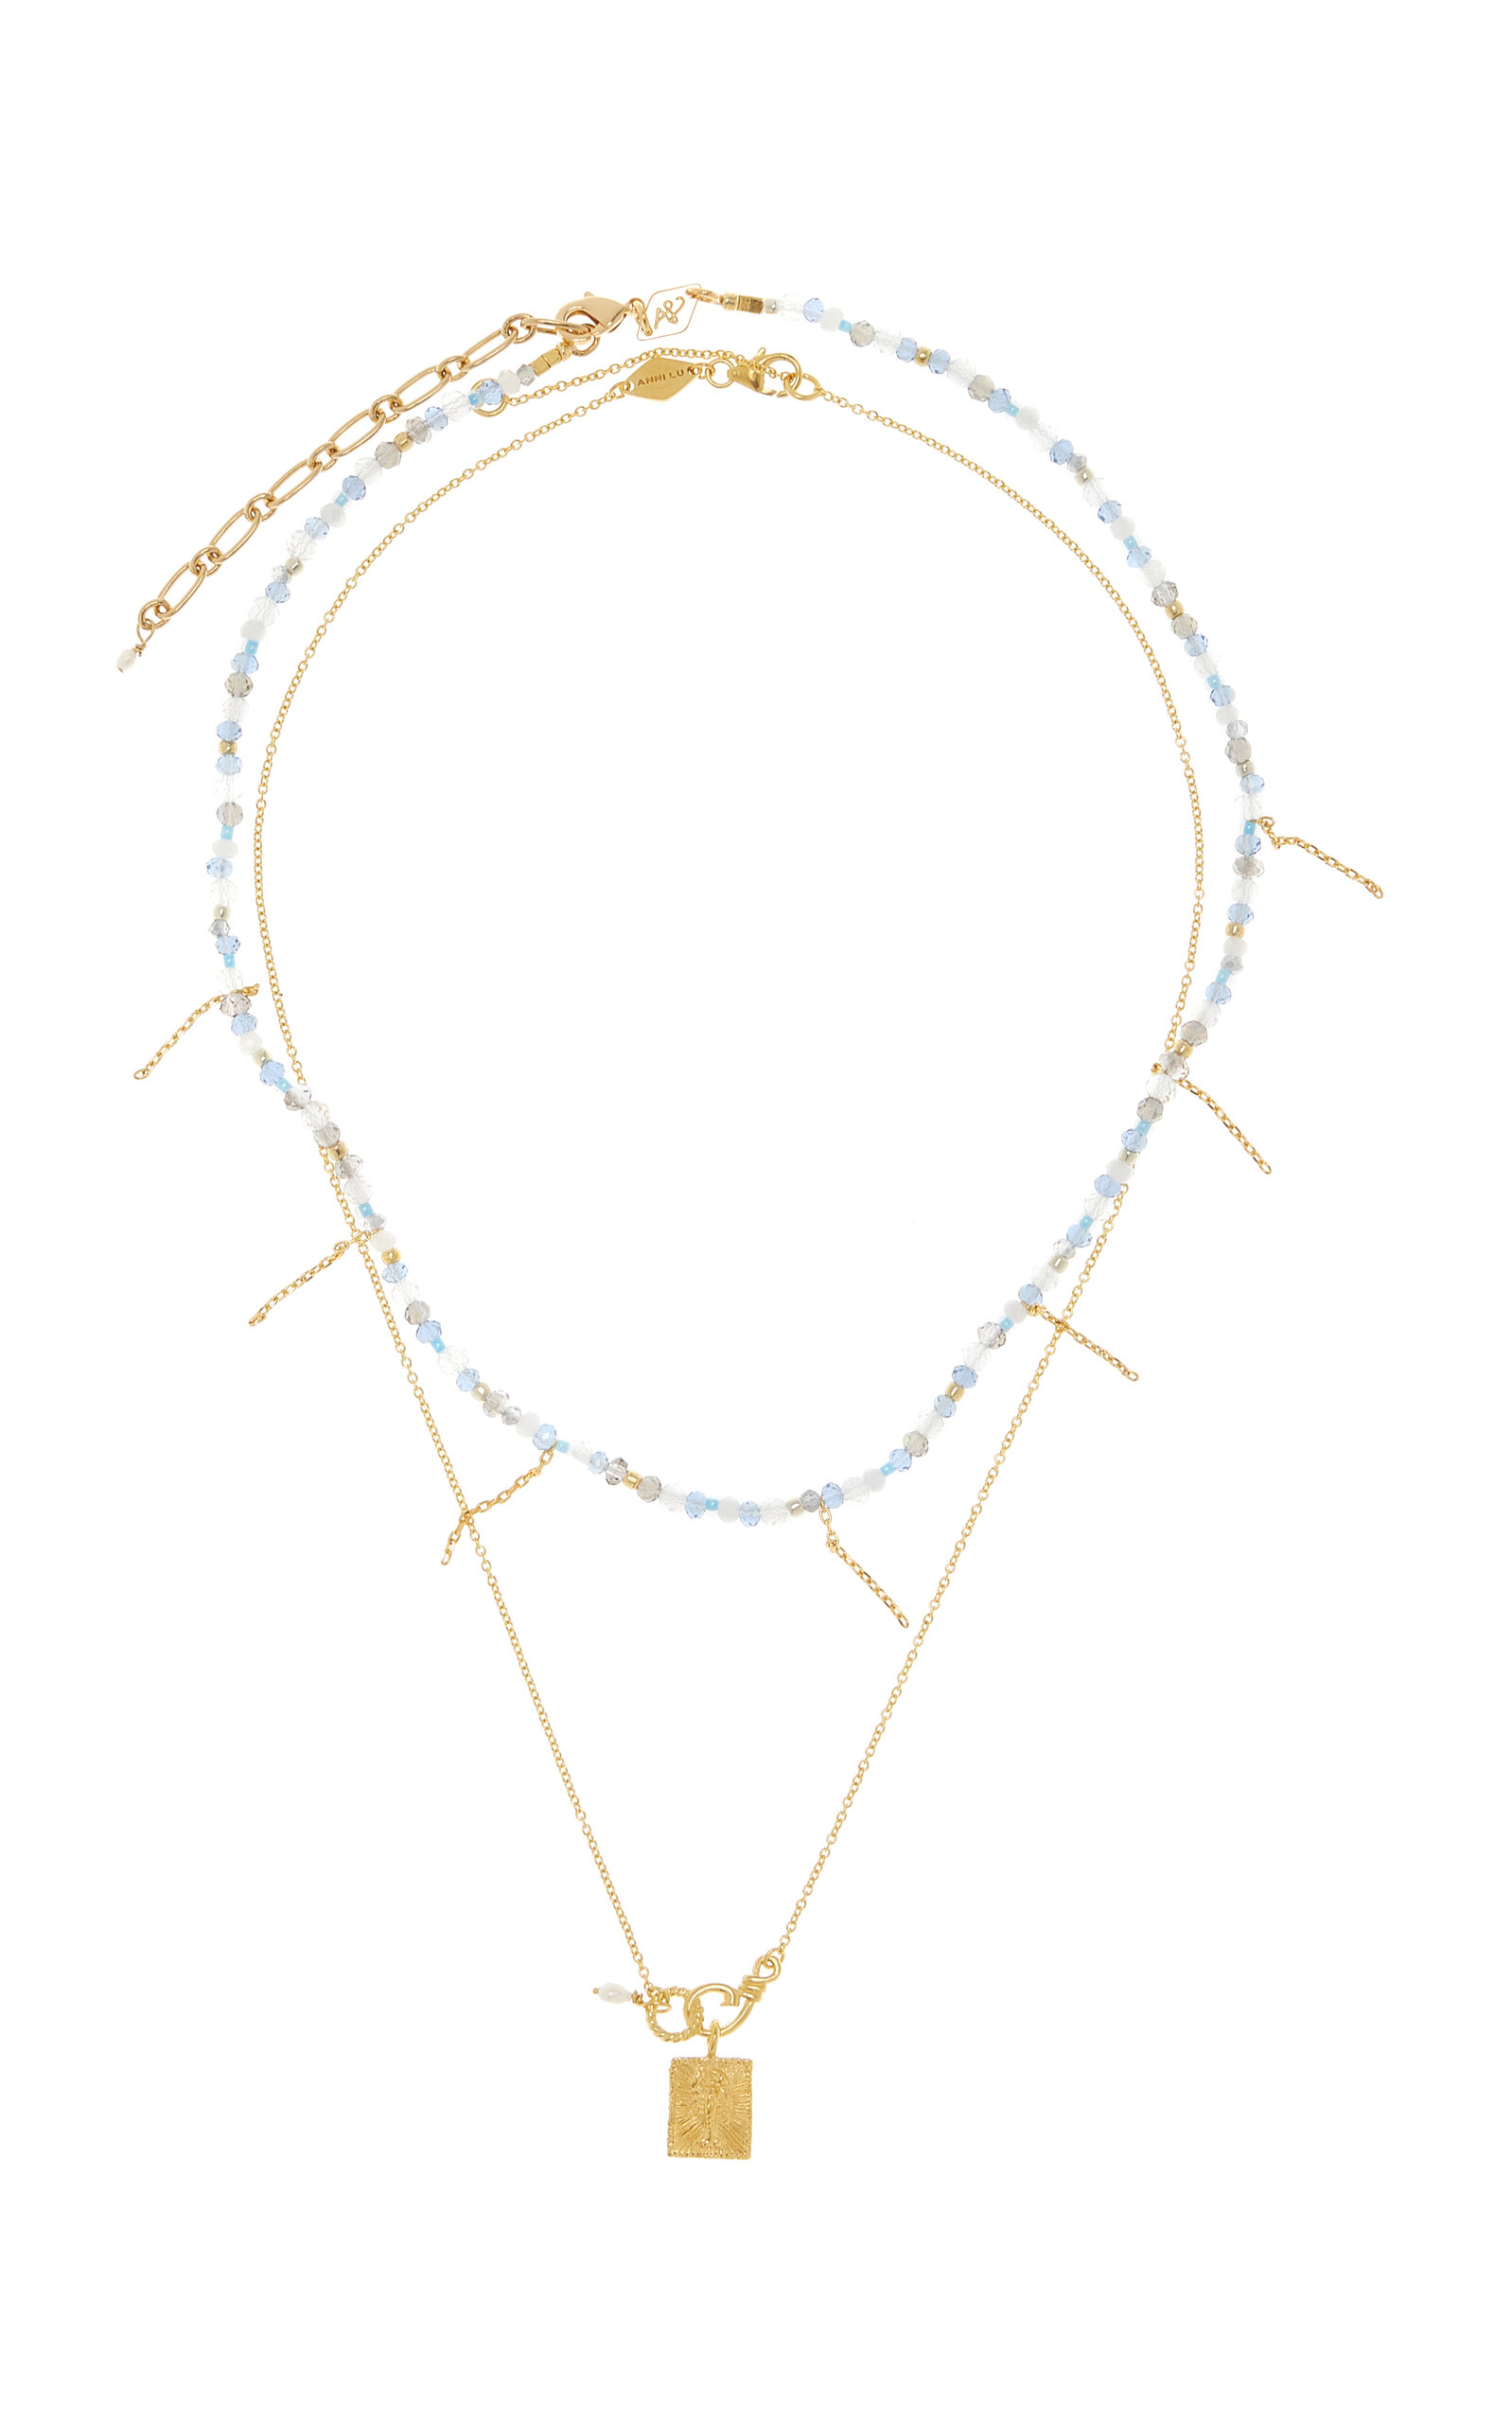 The Good Life & Silver Lining Necklace Set